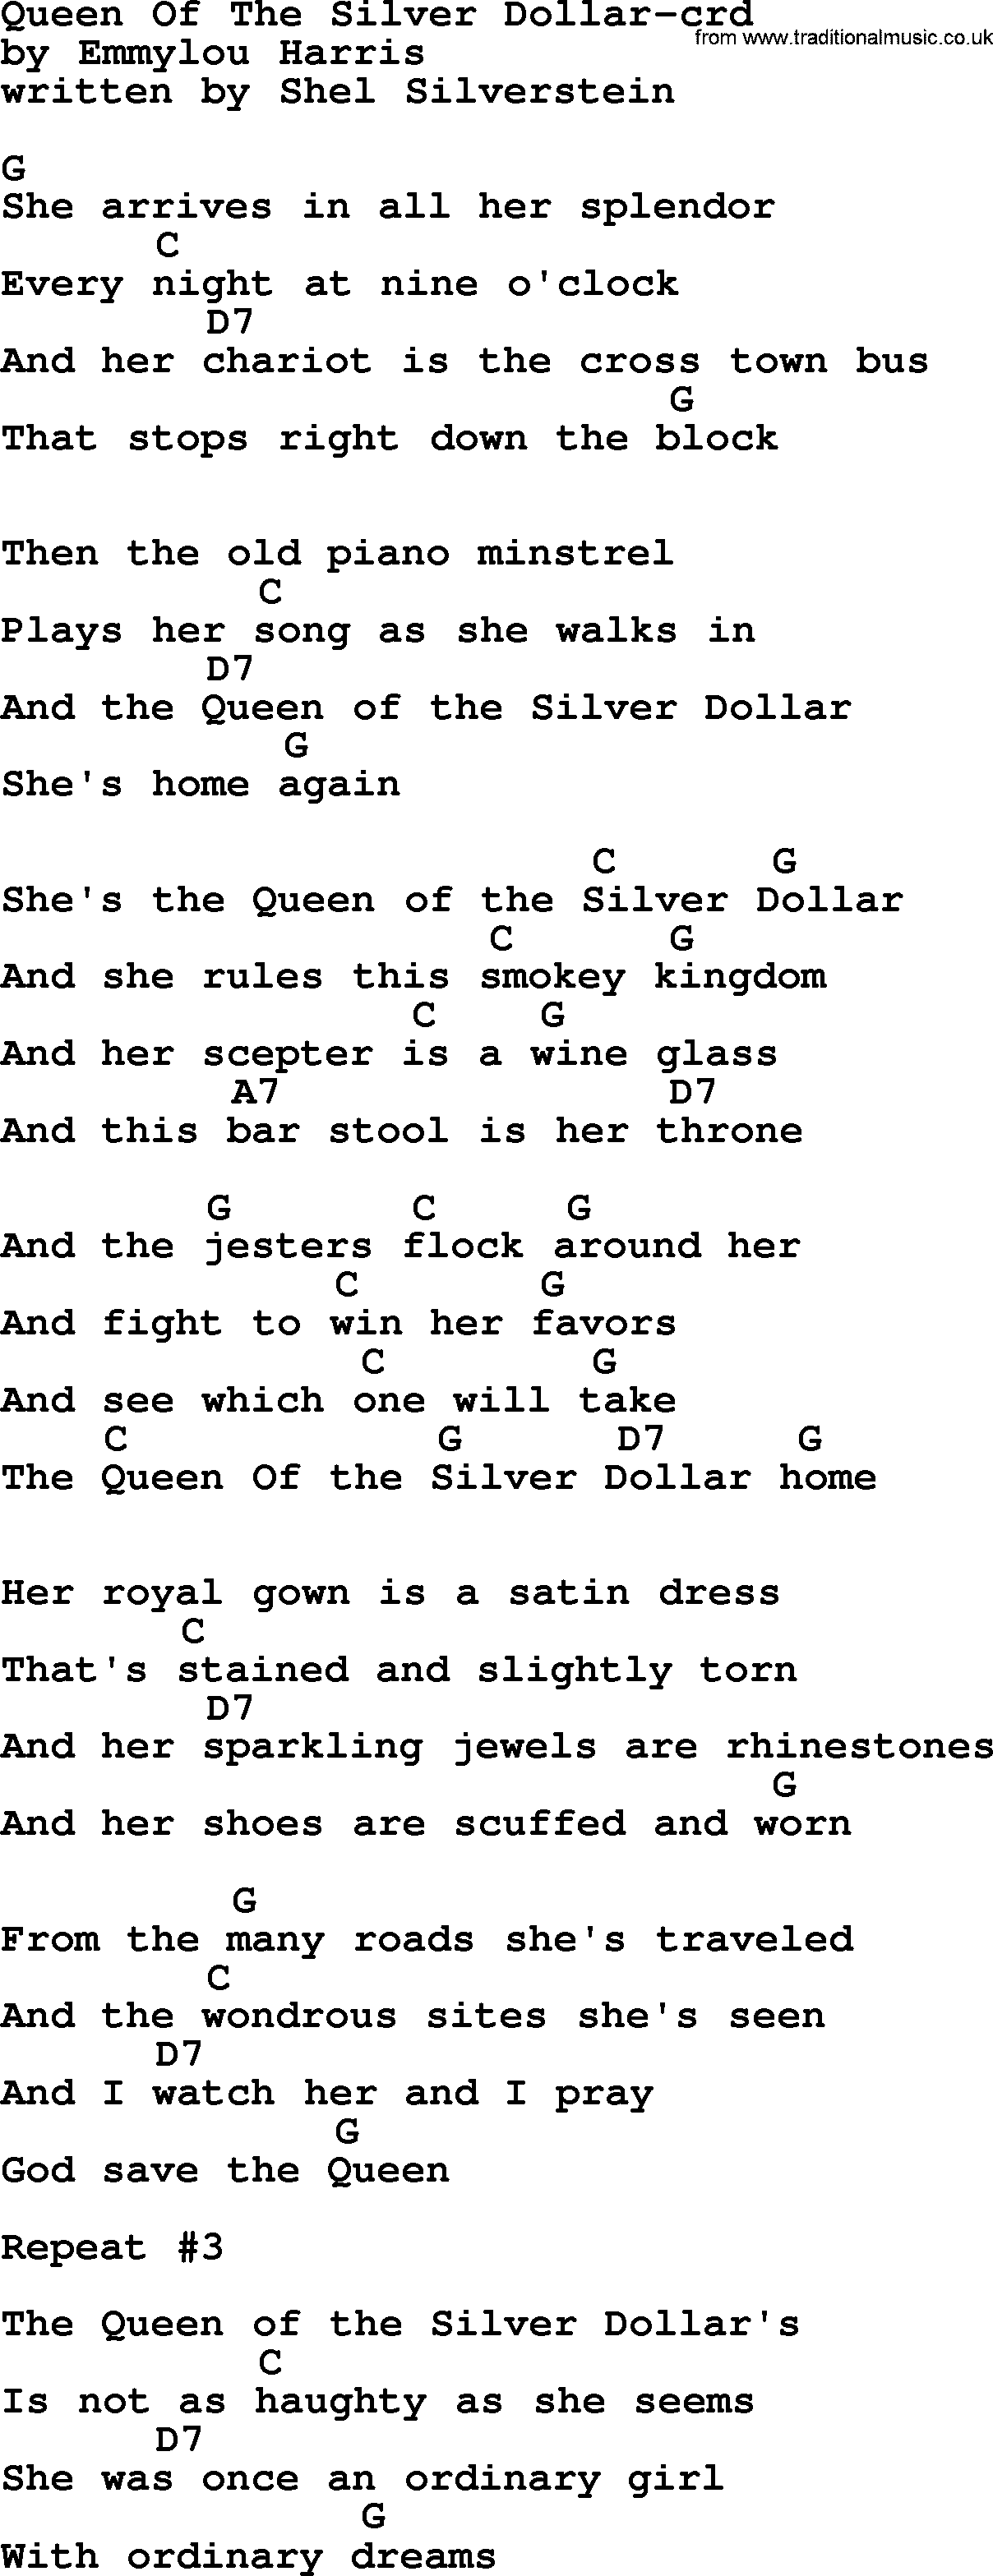 Emmylou Harris song: Queen Of The Silver Dollar lyrics and chords